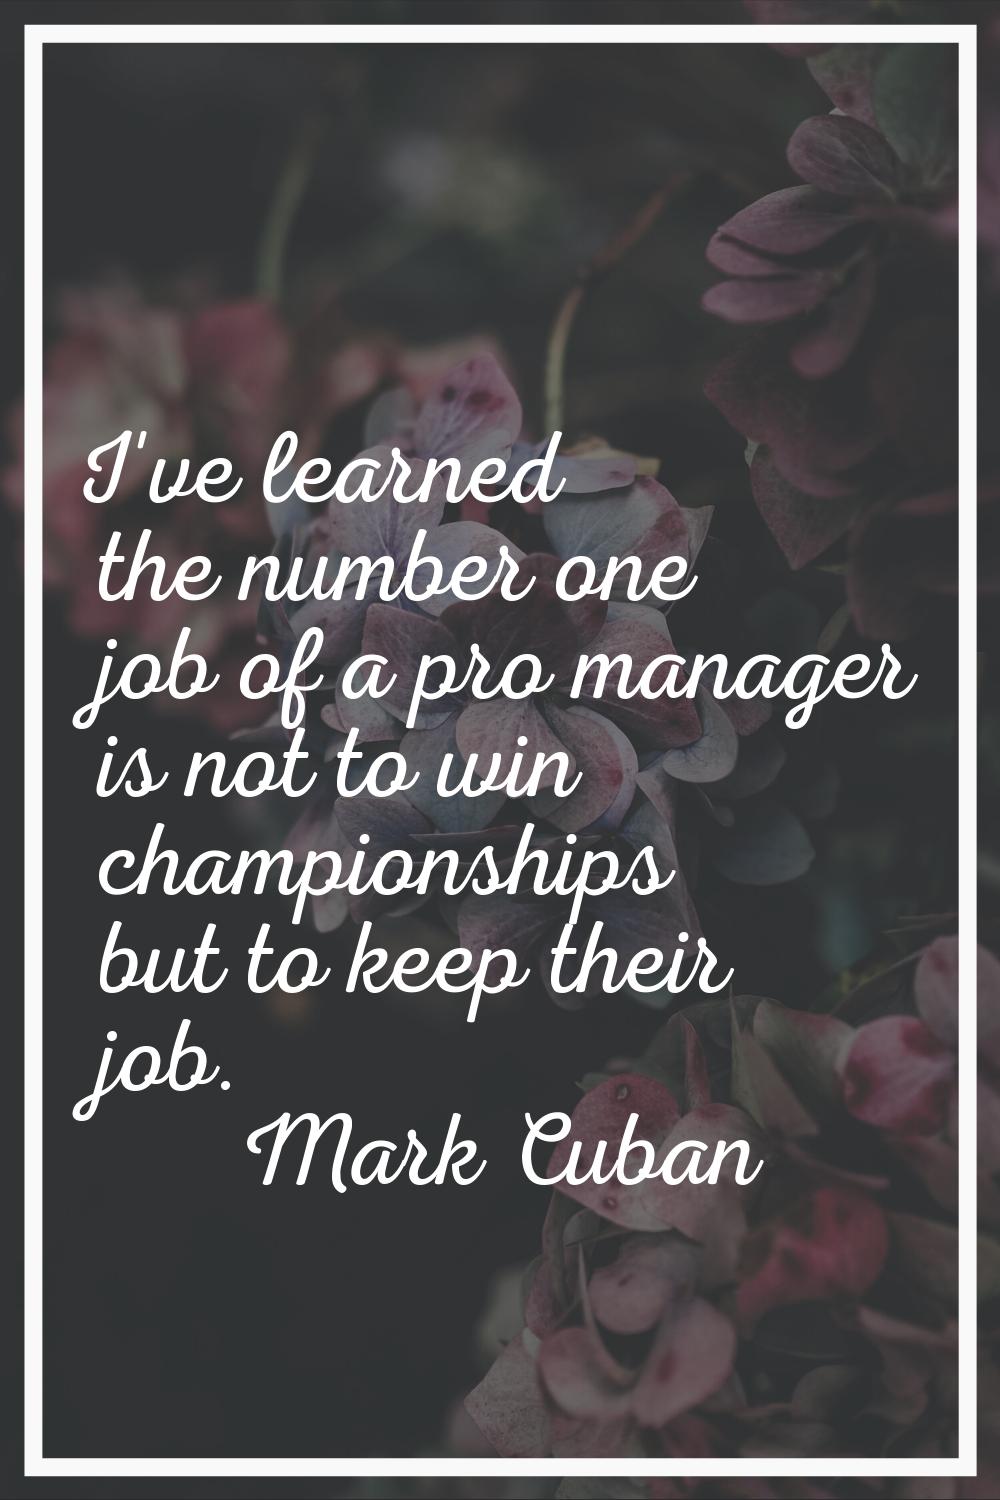 I've learned the number one job of a pro manager is not to win championships but to keep their job.